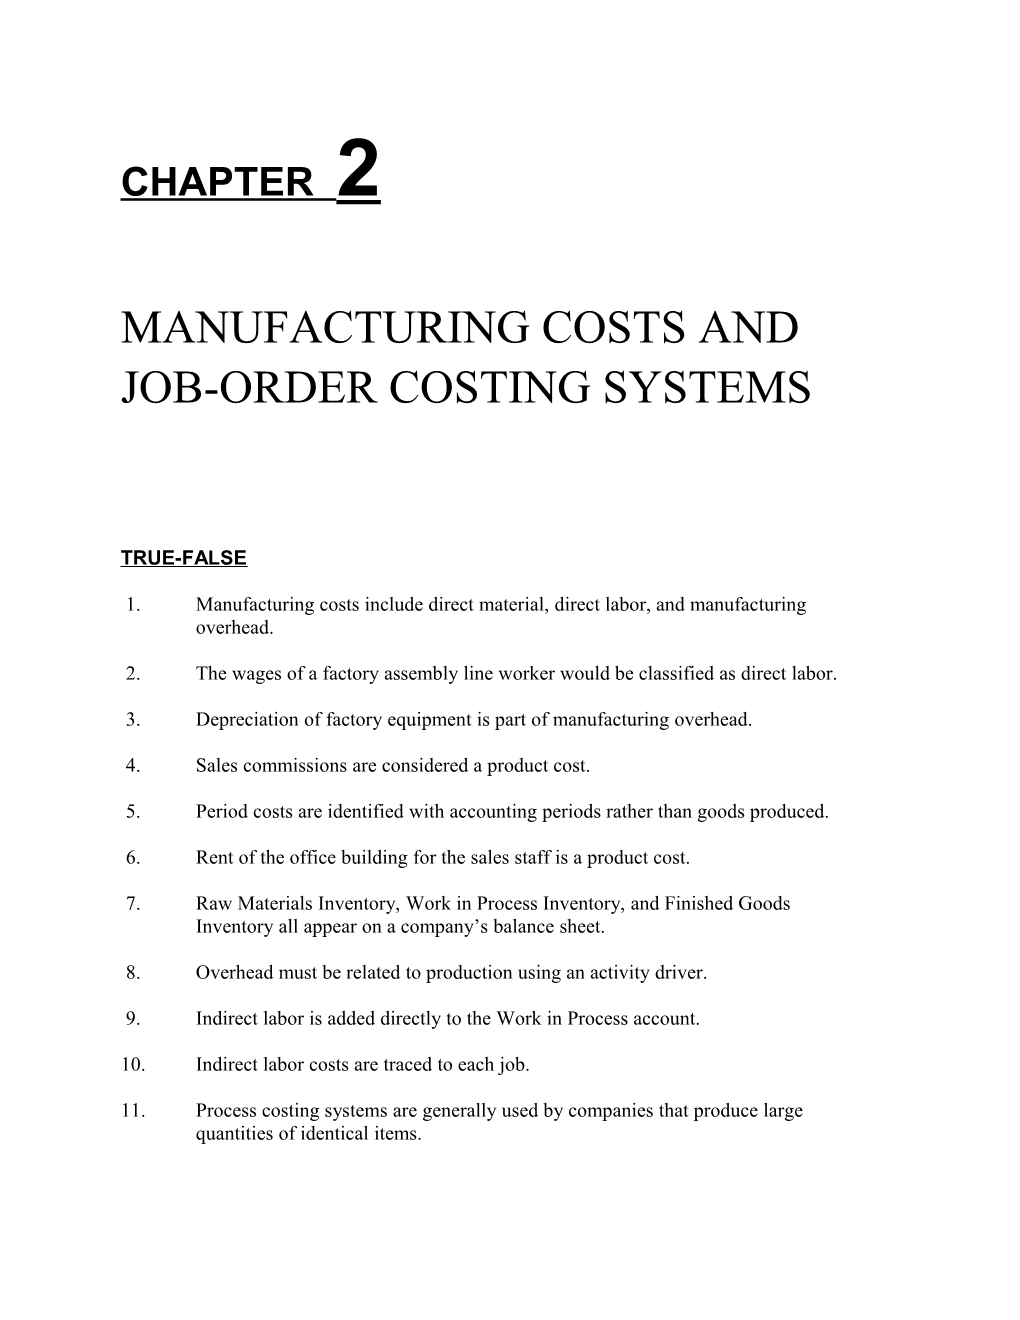 Manufacturing Costs and Job-Order Costing Systems